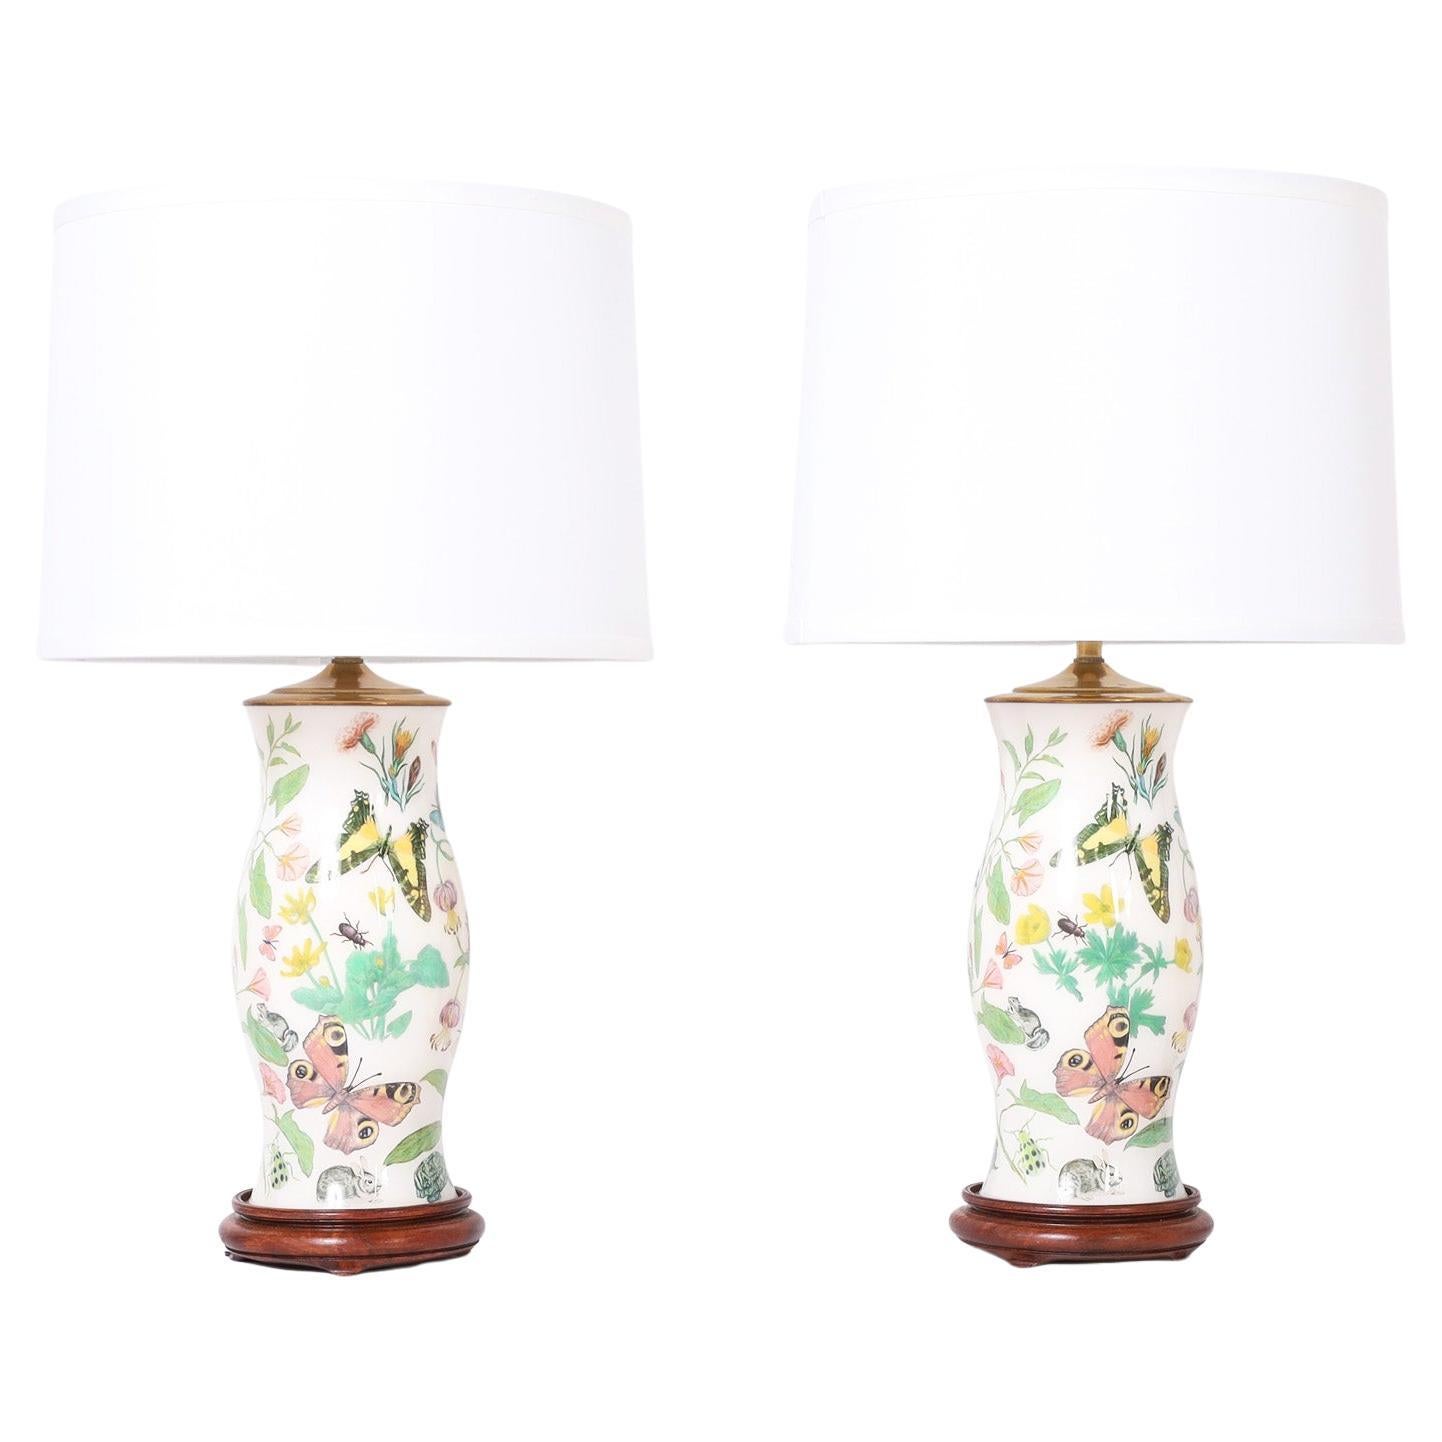 Pair of Reverse Decoupage Table Lamps